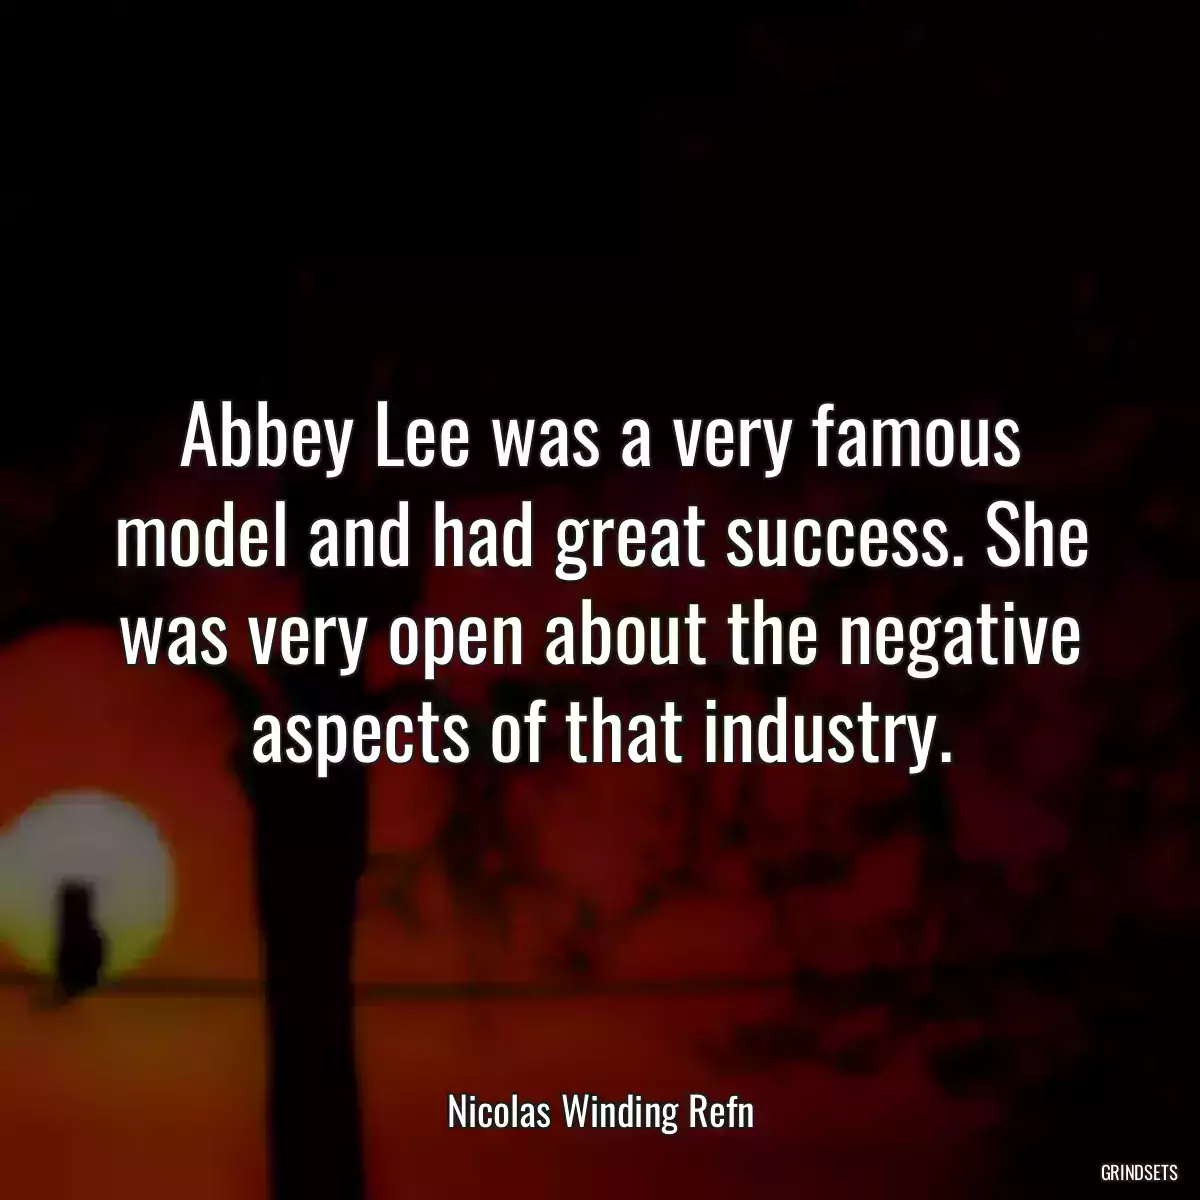 Abbey Lee was a very famous model and had great success. She was very open about the negative aspects of that industry.